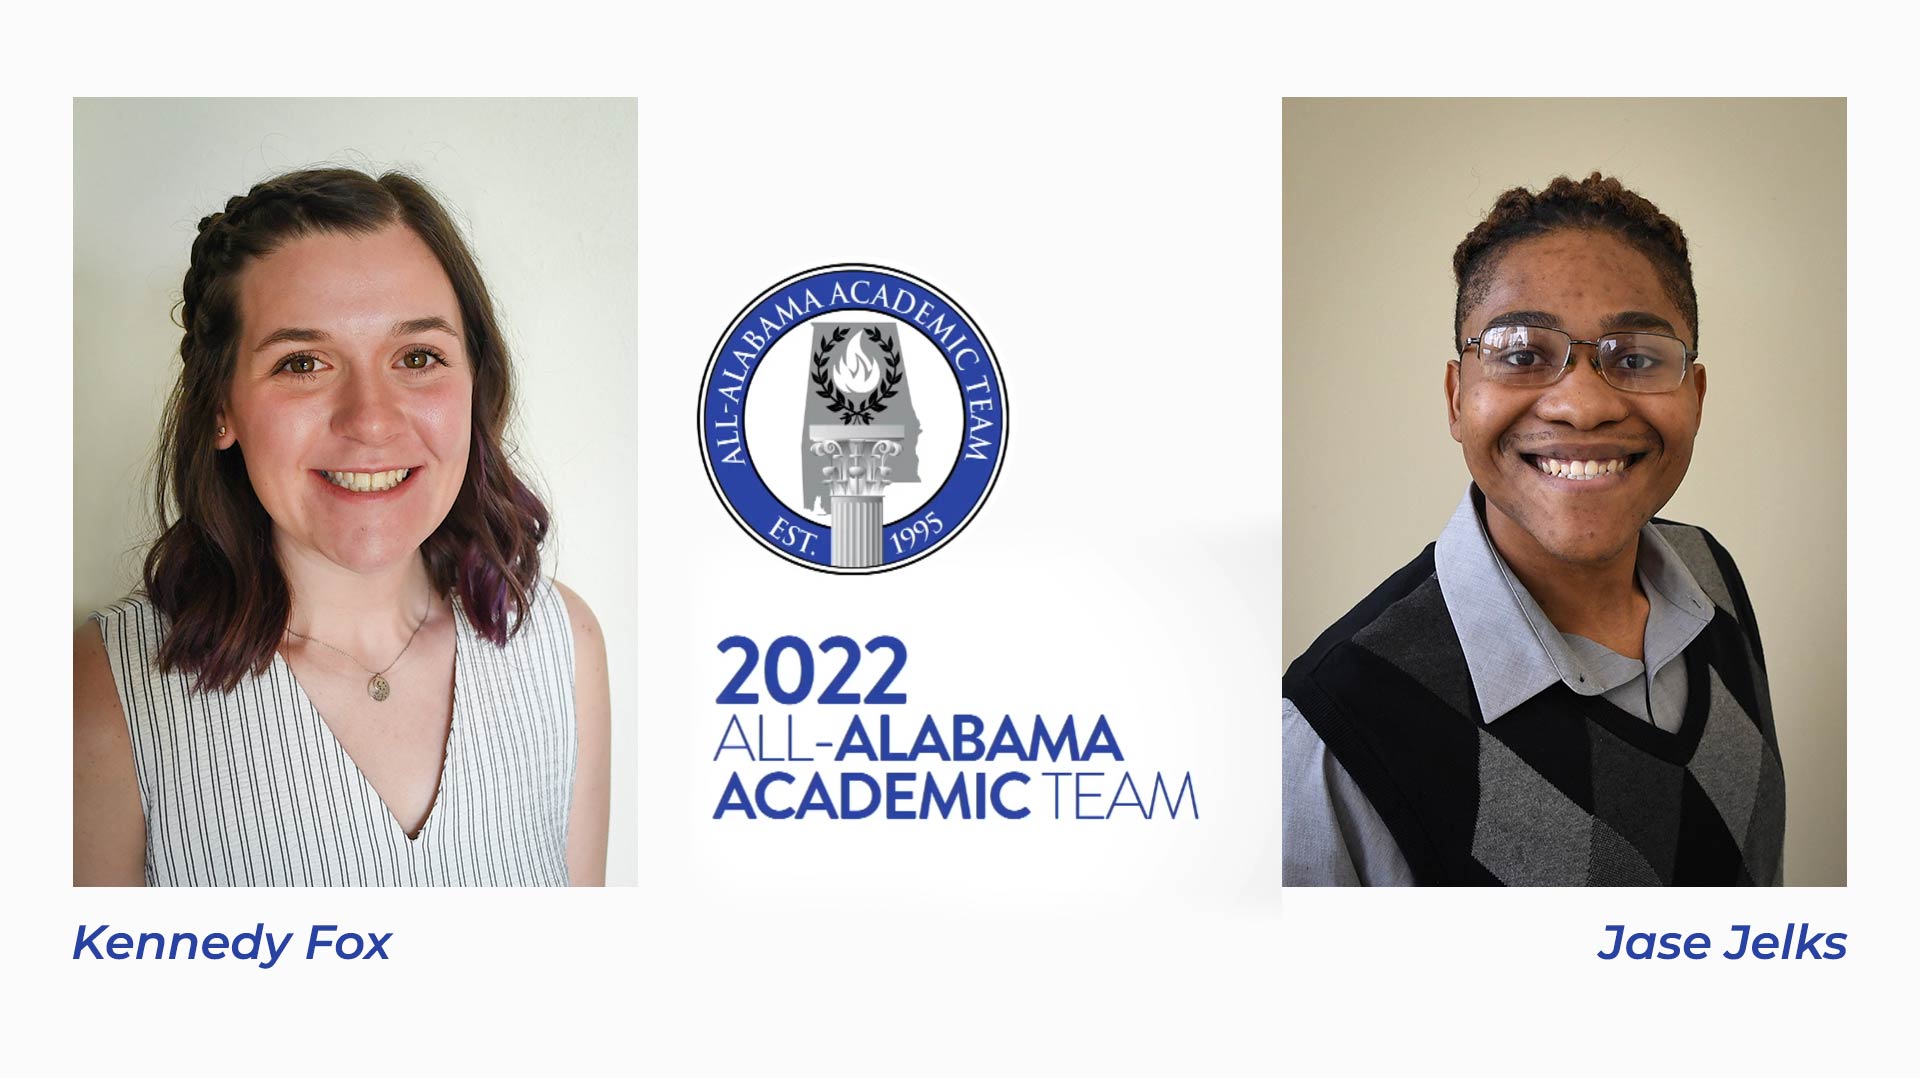 Gadsden State All-Alabama Academic Team members Kennedy Fox of Glencoe and Jase Jelks of Centre